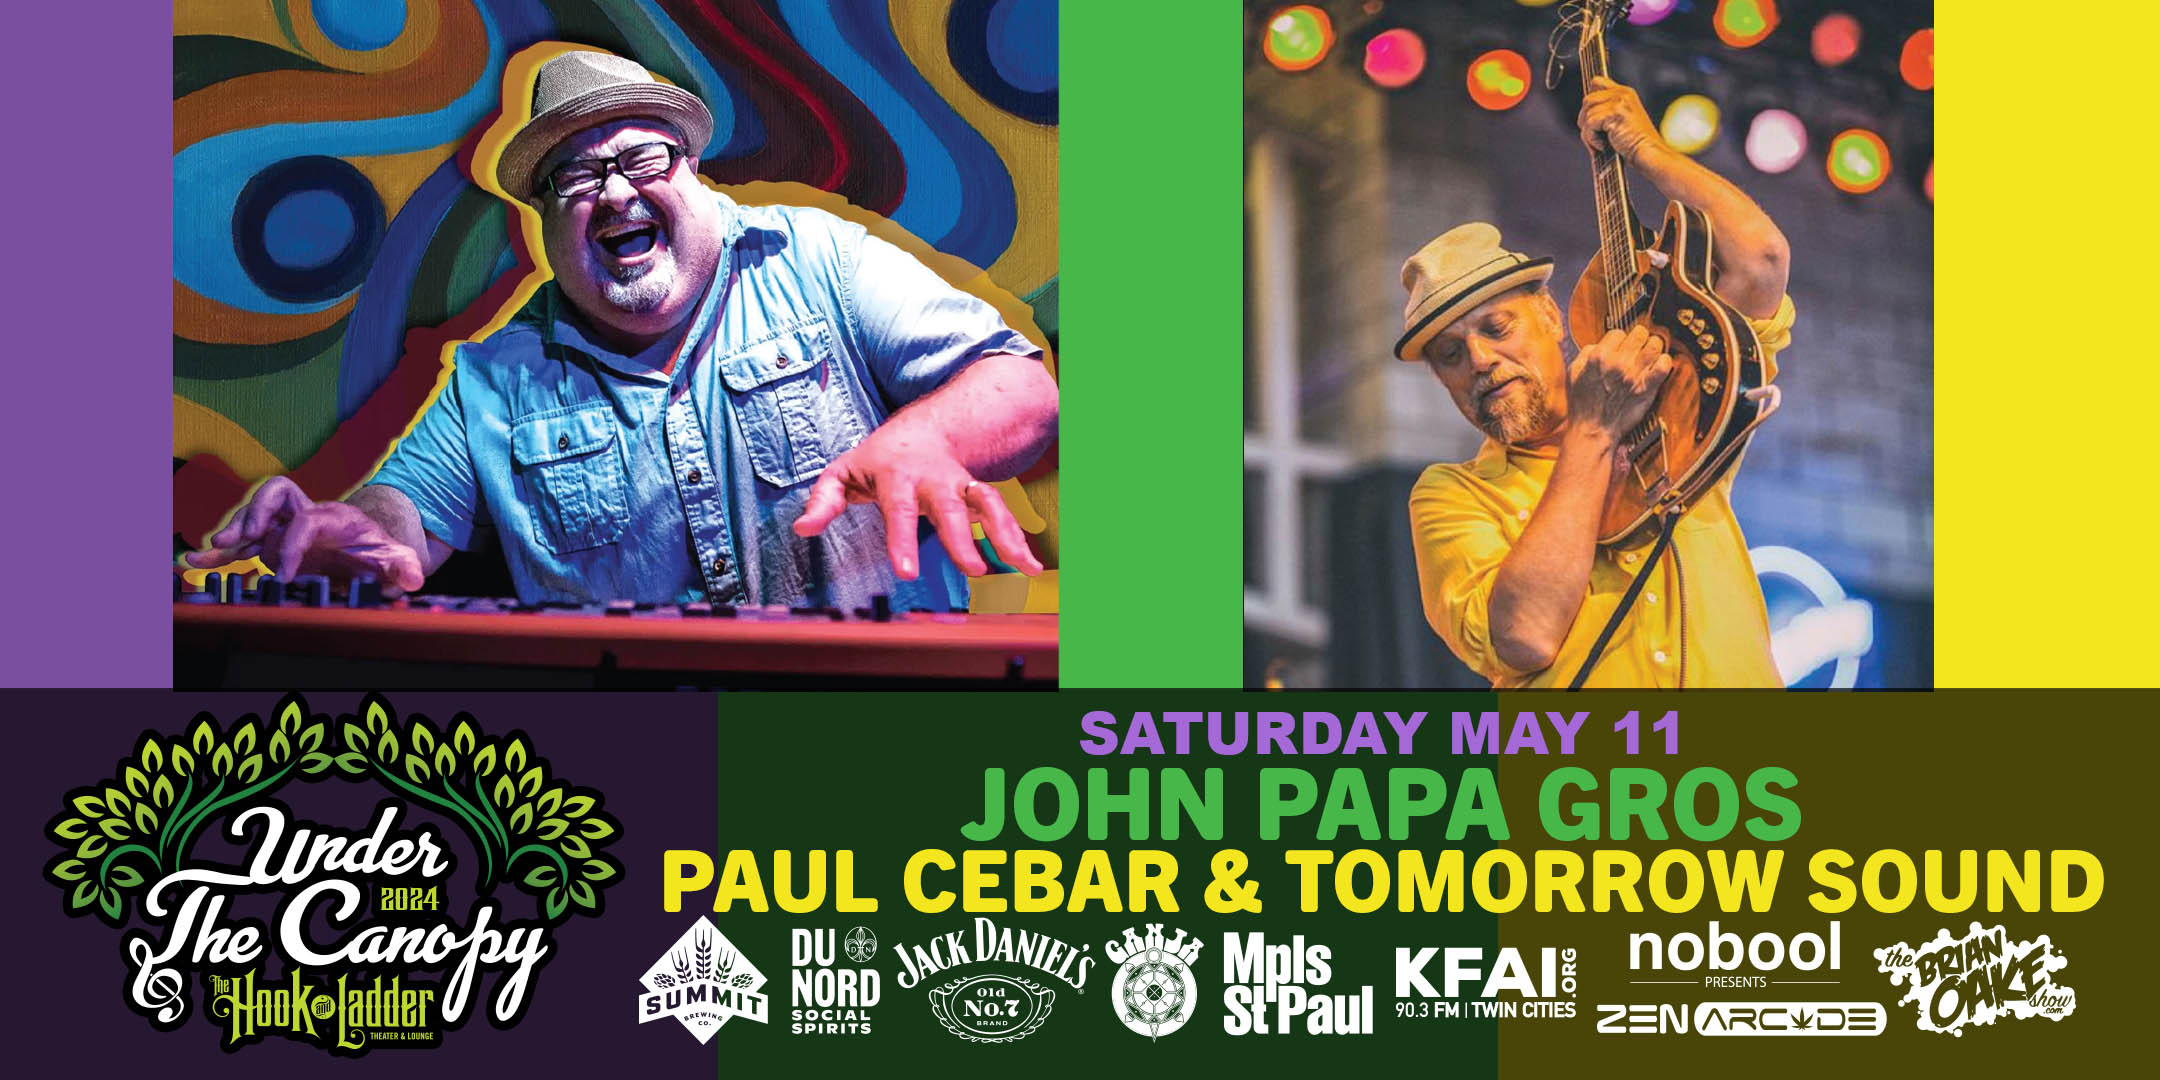 John 'Papa' Gros / Paul Cebar And Tomorrow Sound Saturday, June 8, 2024 Under The Canopy at The Hook and Ladder Theater "An Urban Outdoor Summer Concert Series" Doors 6:00pm :: Music 7:00pm :: 21+ Reserved Seats: $40 GA: $25 ADV / $30 DOS